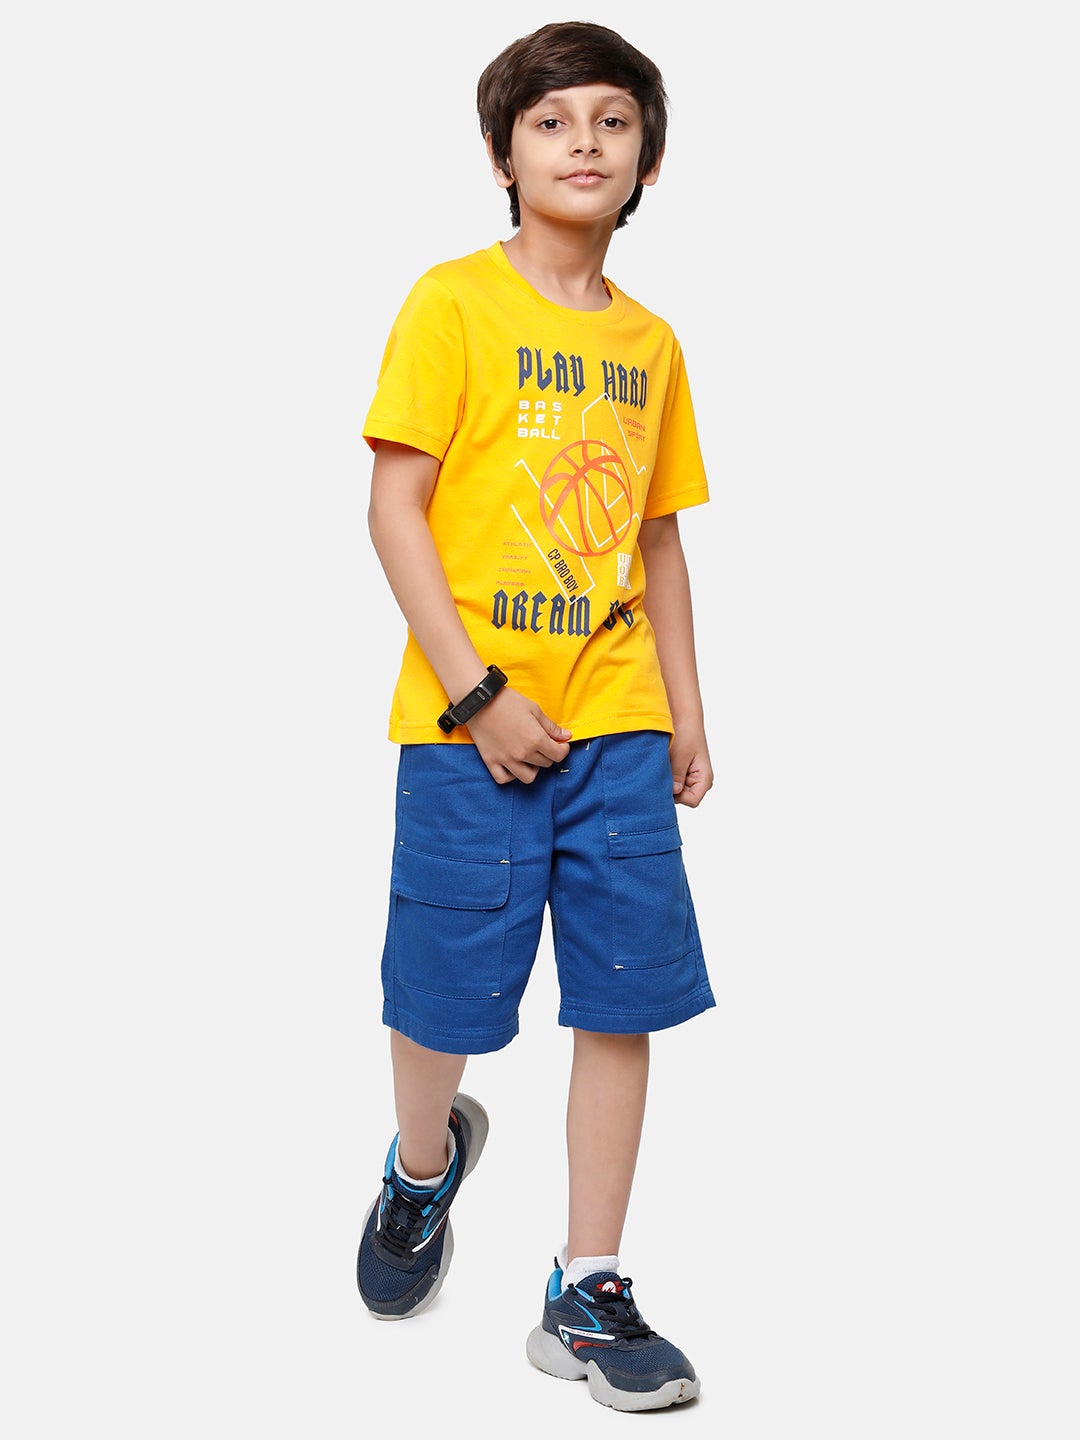 CP Boys Yellow Printed Slim Fit Round Neck T-Shirt T-shirt Classic Polo 